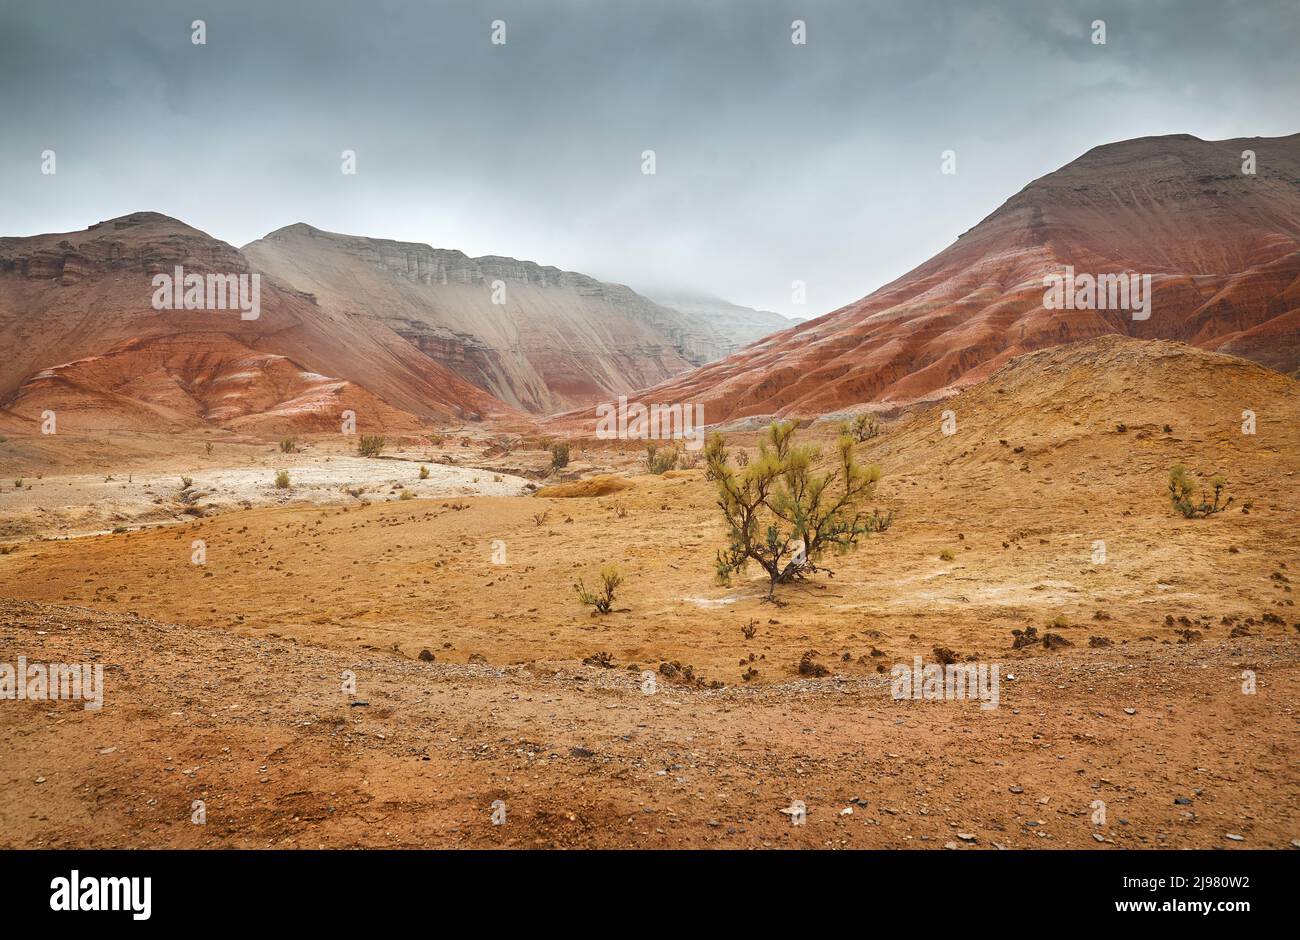 Landscape of Red mount with stripe bizarre layered mountains in canyon at fog overcast cloudy sky in beautiful desert park with dry plant at foregroun Stock Photo